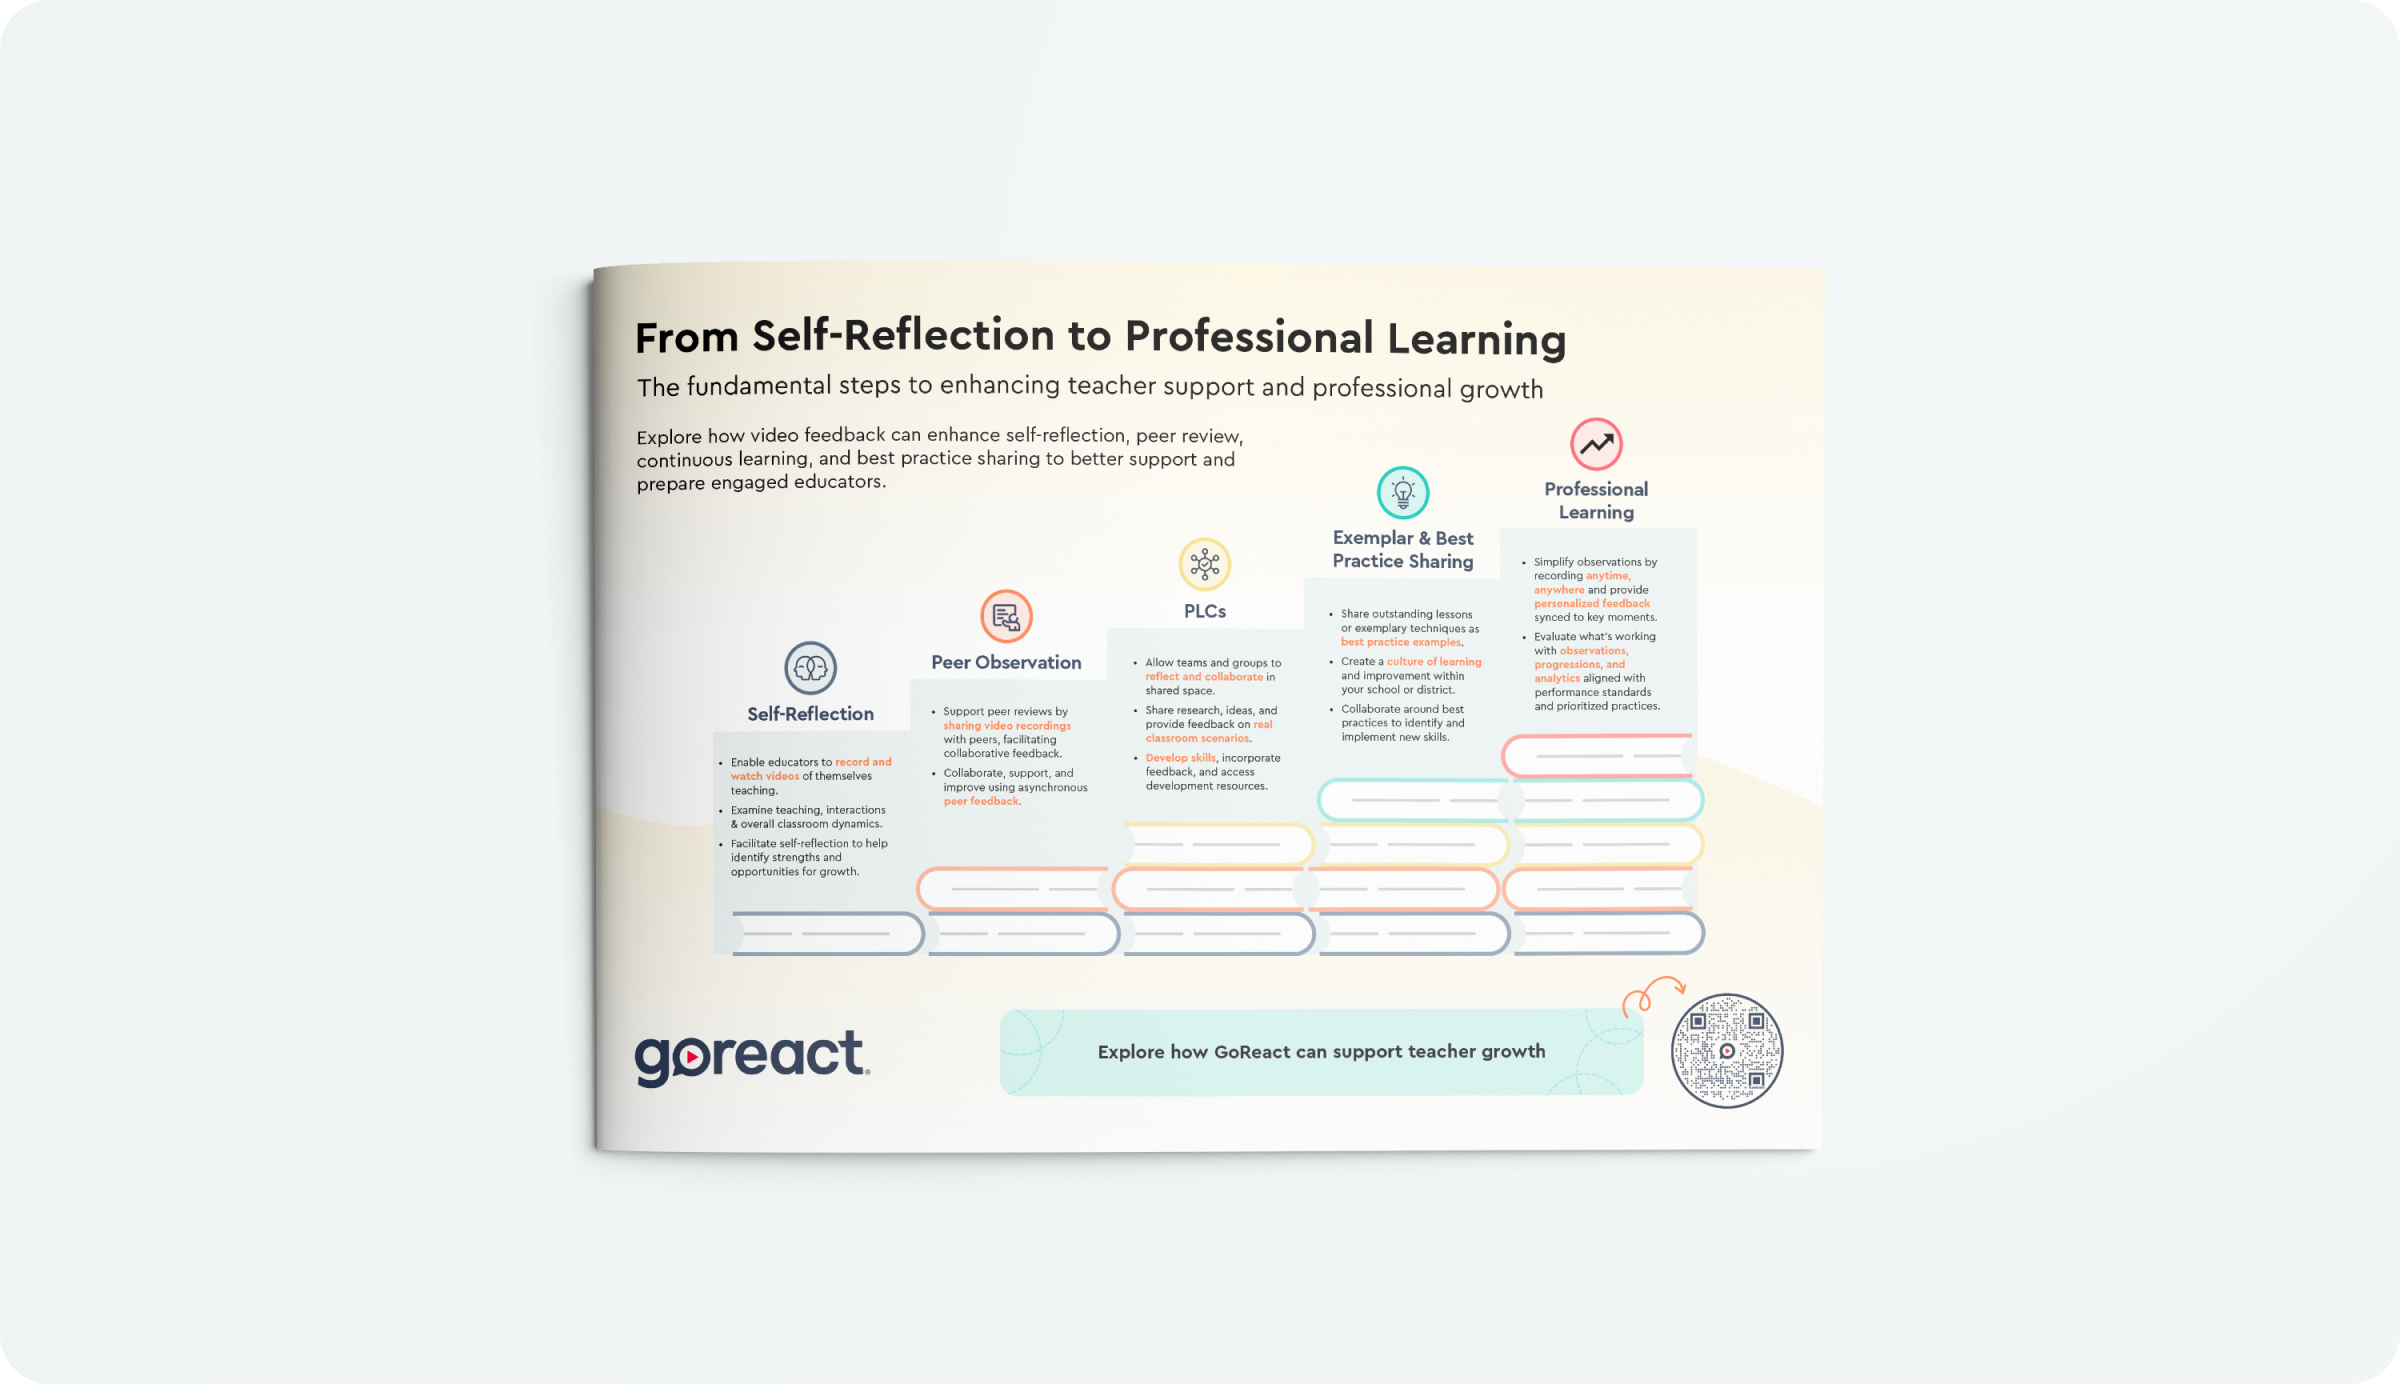 From Self-Reflection to Professional Learning for K12 Teacher Growth